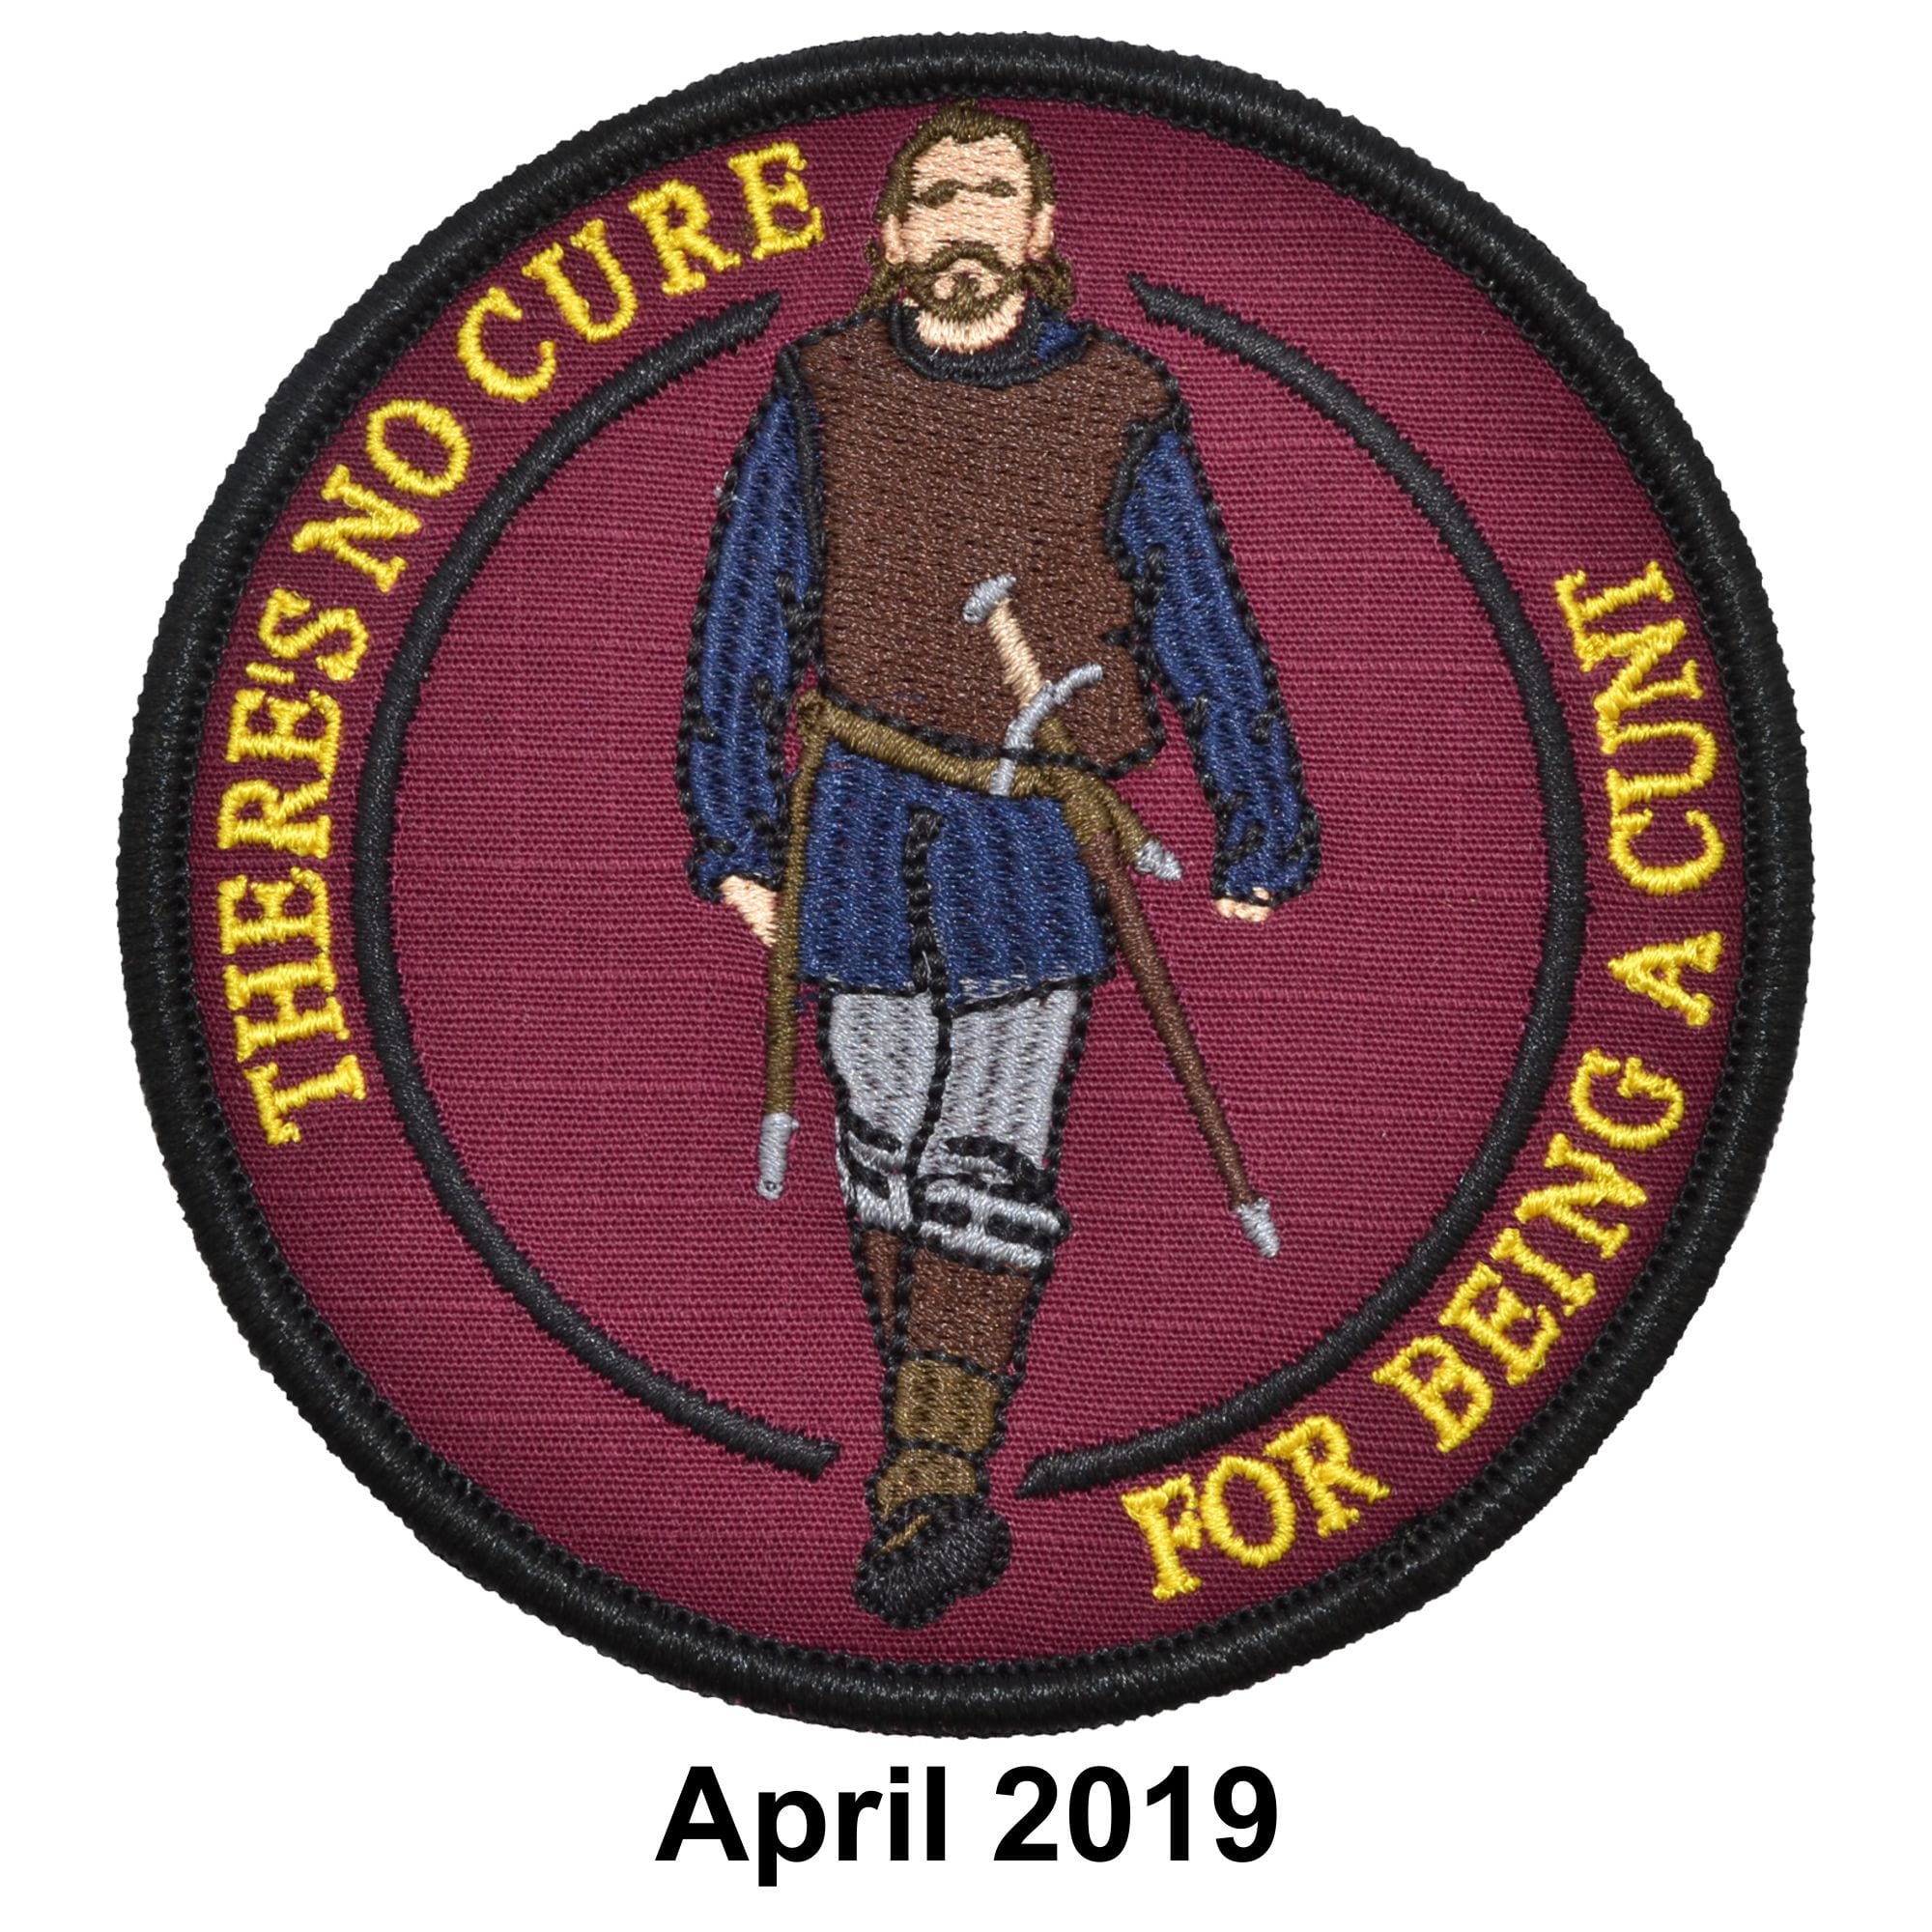 April 2019 Patch of the Month - Got No Cure For Being A Cunt